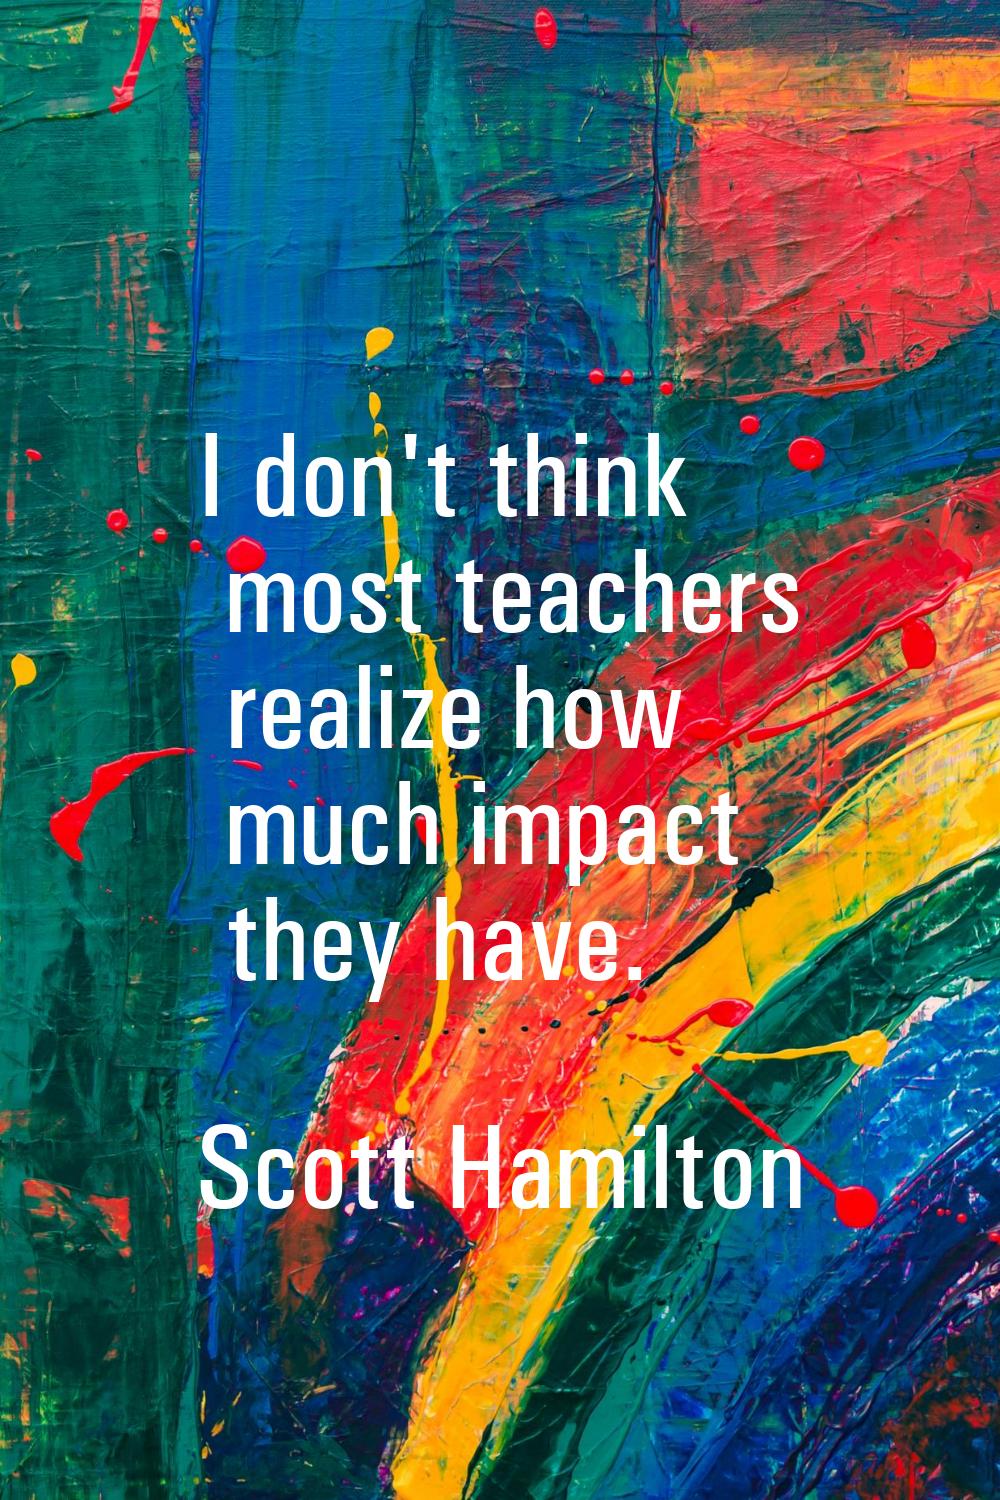 I don't think most teachers realize how much impact they have.